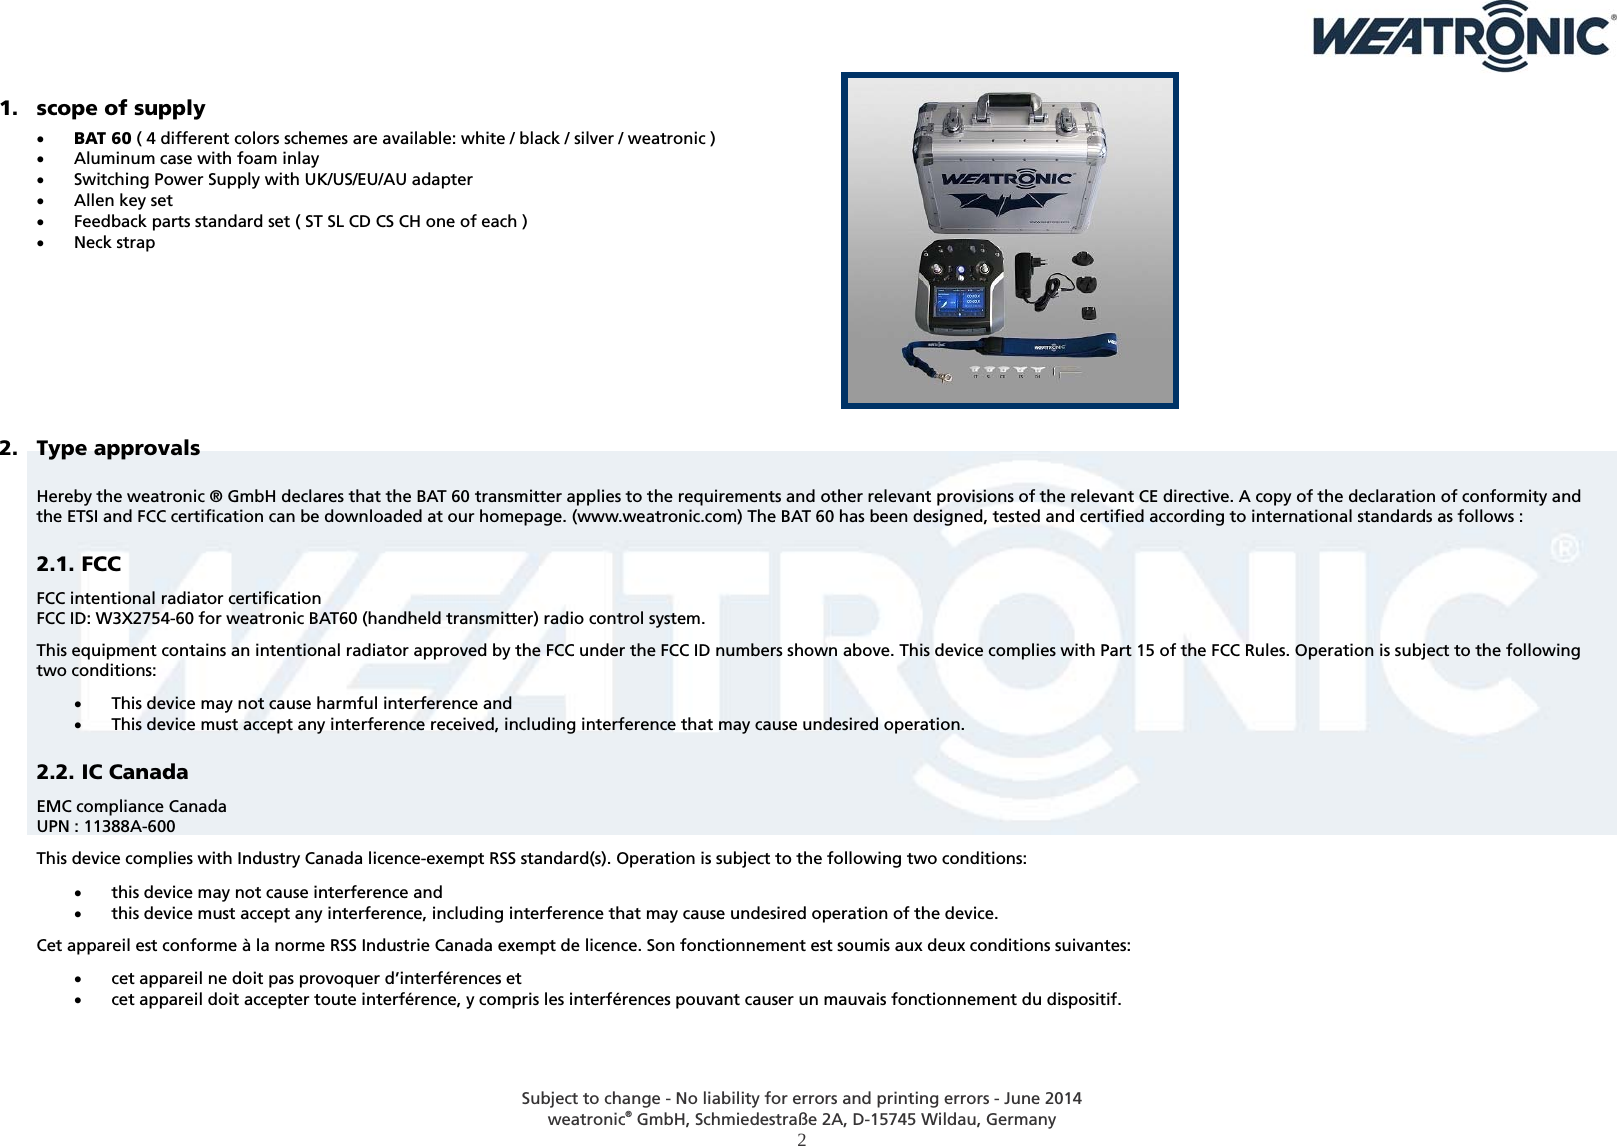  Subject to change - No liability for errors and printing errors - June 2014 weatronic® GmbH, Schmiedestraße 2A, D-15745 Wildau, Germany  2 1. scope of supply   BAT 60 ( 4 different colors schemes are available: white / black / silver / weatronic )  Aluminum case with foam inlay  Switching Power Supply with UK/US/EU/AU adapter  Allen key set  Feedback parts standard set ( ST SL CD CS CH one of each )  Neck strap         2. Type approvals  Hereby the weatronic ® GmbH declares that the BAT 60 transmitter applies to the requirements and other relevant provisions of the relevant CE directive. A copy of the declaration of conformity and the ETSI and FCC certification can be downloaded at our homepage. (www.weatronic.com) The BAT 60 has been designed, tested and certified according to international standards as follows : 2.1. FCC FCC intentional radiator certification FCC ID: W3X2754-60 for weatronic BAT60 (handheld transmitter) radio control system. This equipment contains an intentional radiator approved by the FCC under the FCC ID numbers shown above. This device complies with Part 15 of the FCC Rules. Operation is subject to the following two conditions:  This device may not cause harmful interference and  This device must accept any interference received, including interference that may cause undesired operation. 2.2. IC Canada EMC compliance Canada UPN : 11388A-600  This device complies with Industry Canada licence-exempt RSS standard(s). Operation is subject to the following two conditions:  this device may not cause interference and  this device must accept any interference, including interference that may cause undesired operation of the device. Cet appareil est conforme à la norme RSS Industrie Canada exempt de licence. Son fonctionnement est soumis aux deux conditions suivantes:  cet appareil ne doit pas provoquer d’interférences et  cet appareil doit accepter toute interférence, y compris les interférences pouvant causer un mauvais fonctionnement du dispositif. 